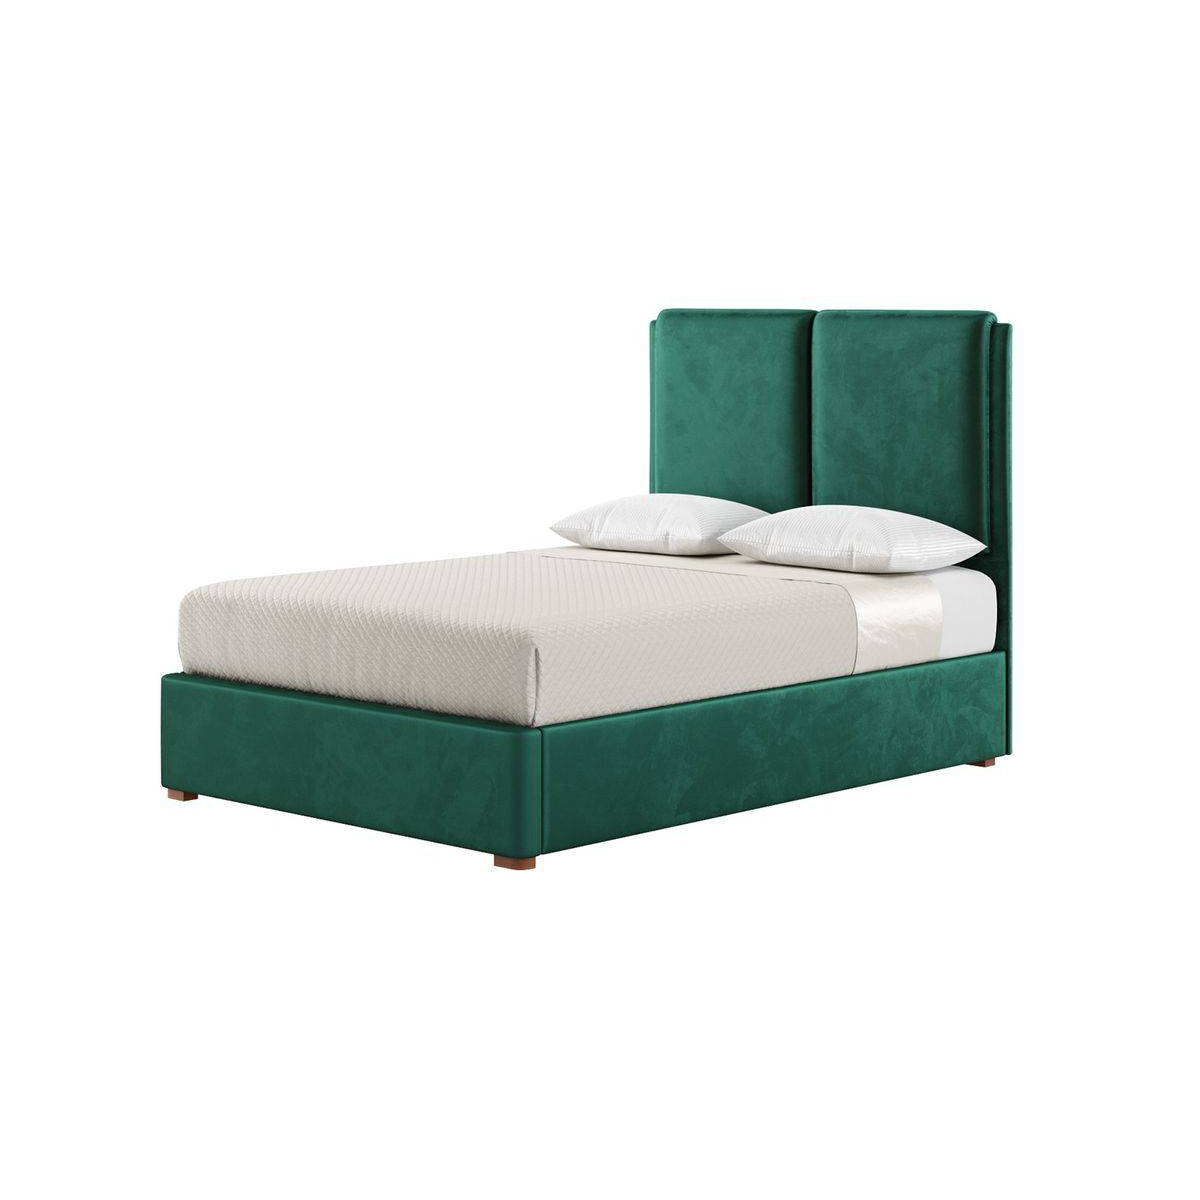 Felix 4ft6 Double Bed Frame With Contemporary Twin Panel Headboard, dark green, Leg colour: aveo - image 1